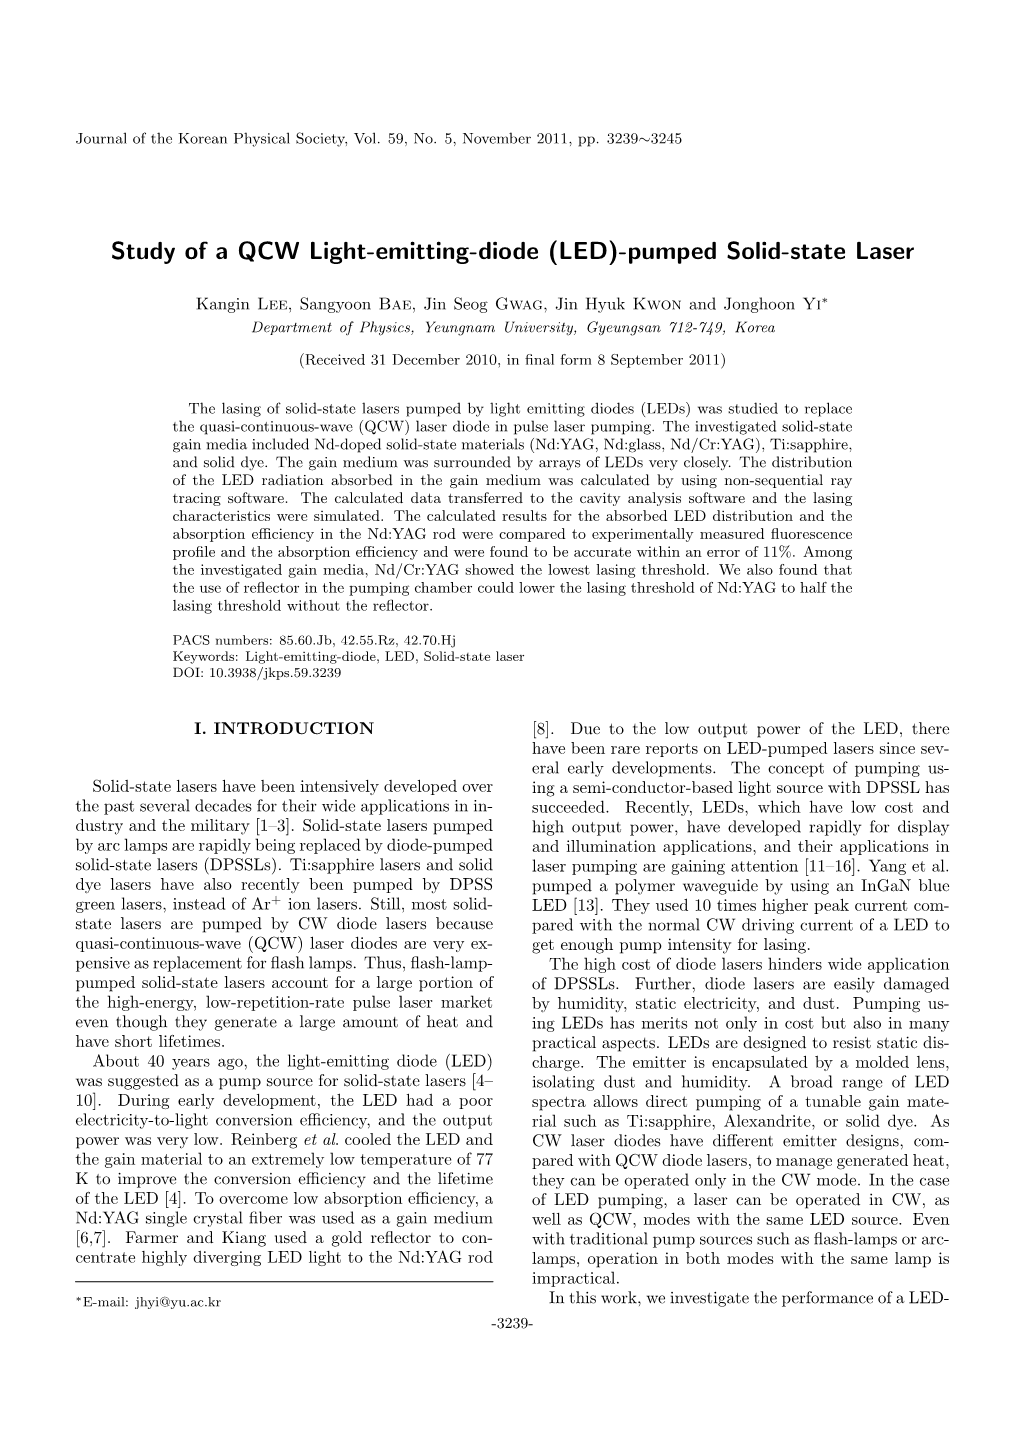 Study of a QCW Light-Emitting-Diode (LED)-Pumped Solid-State Laser